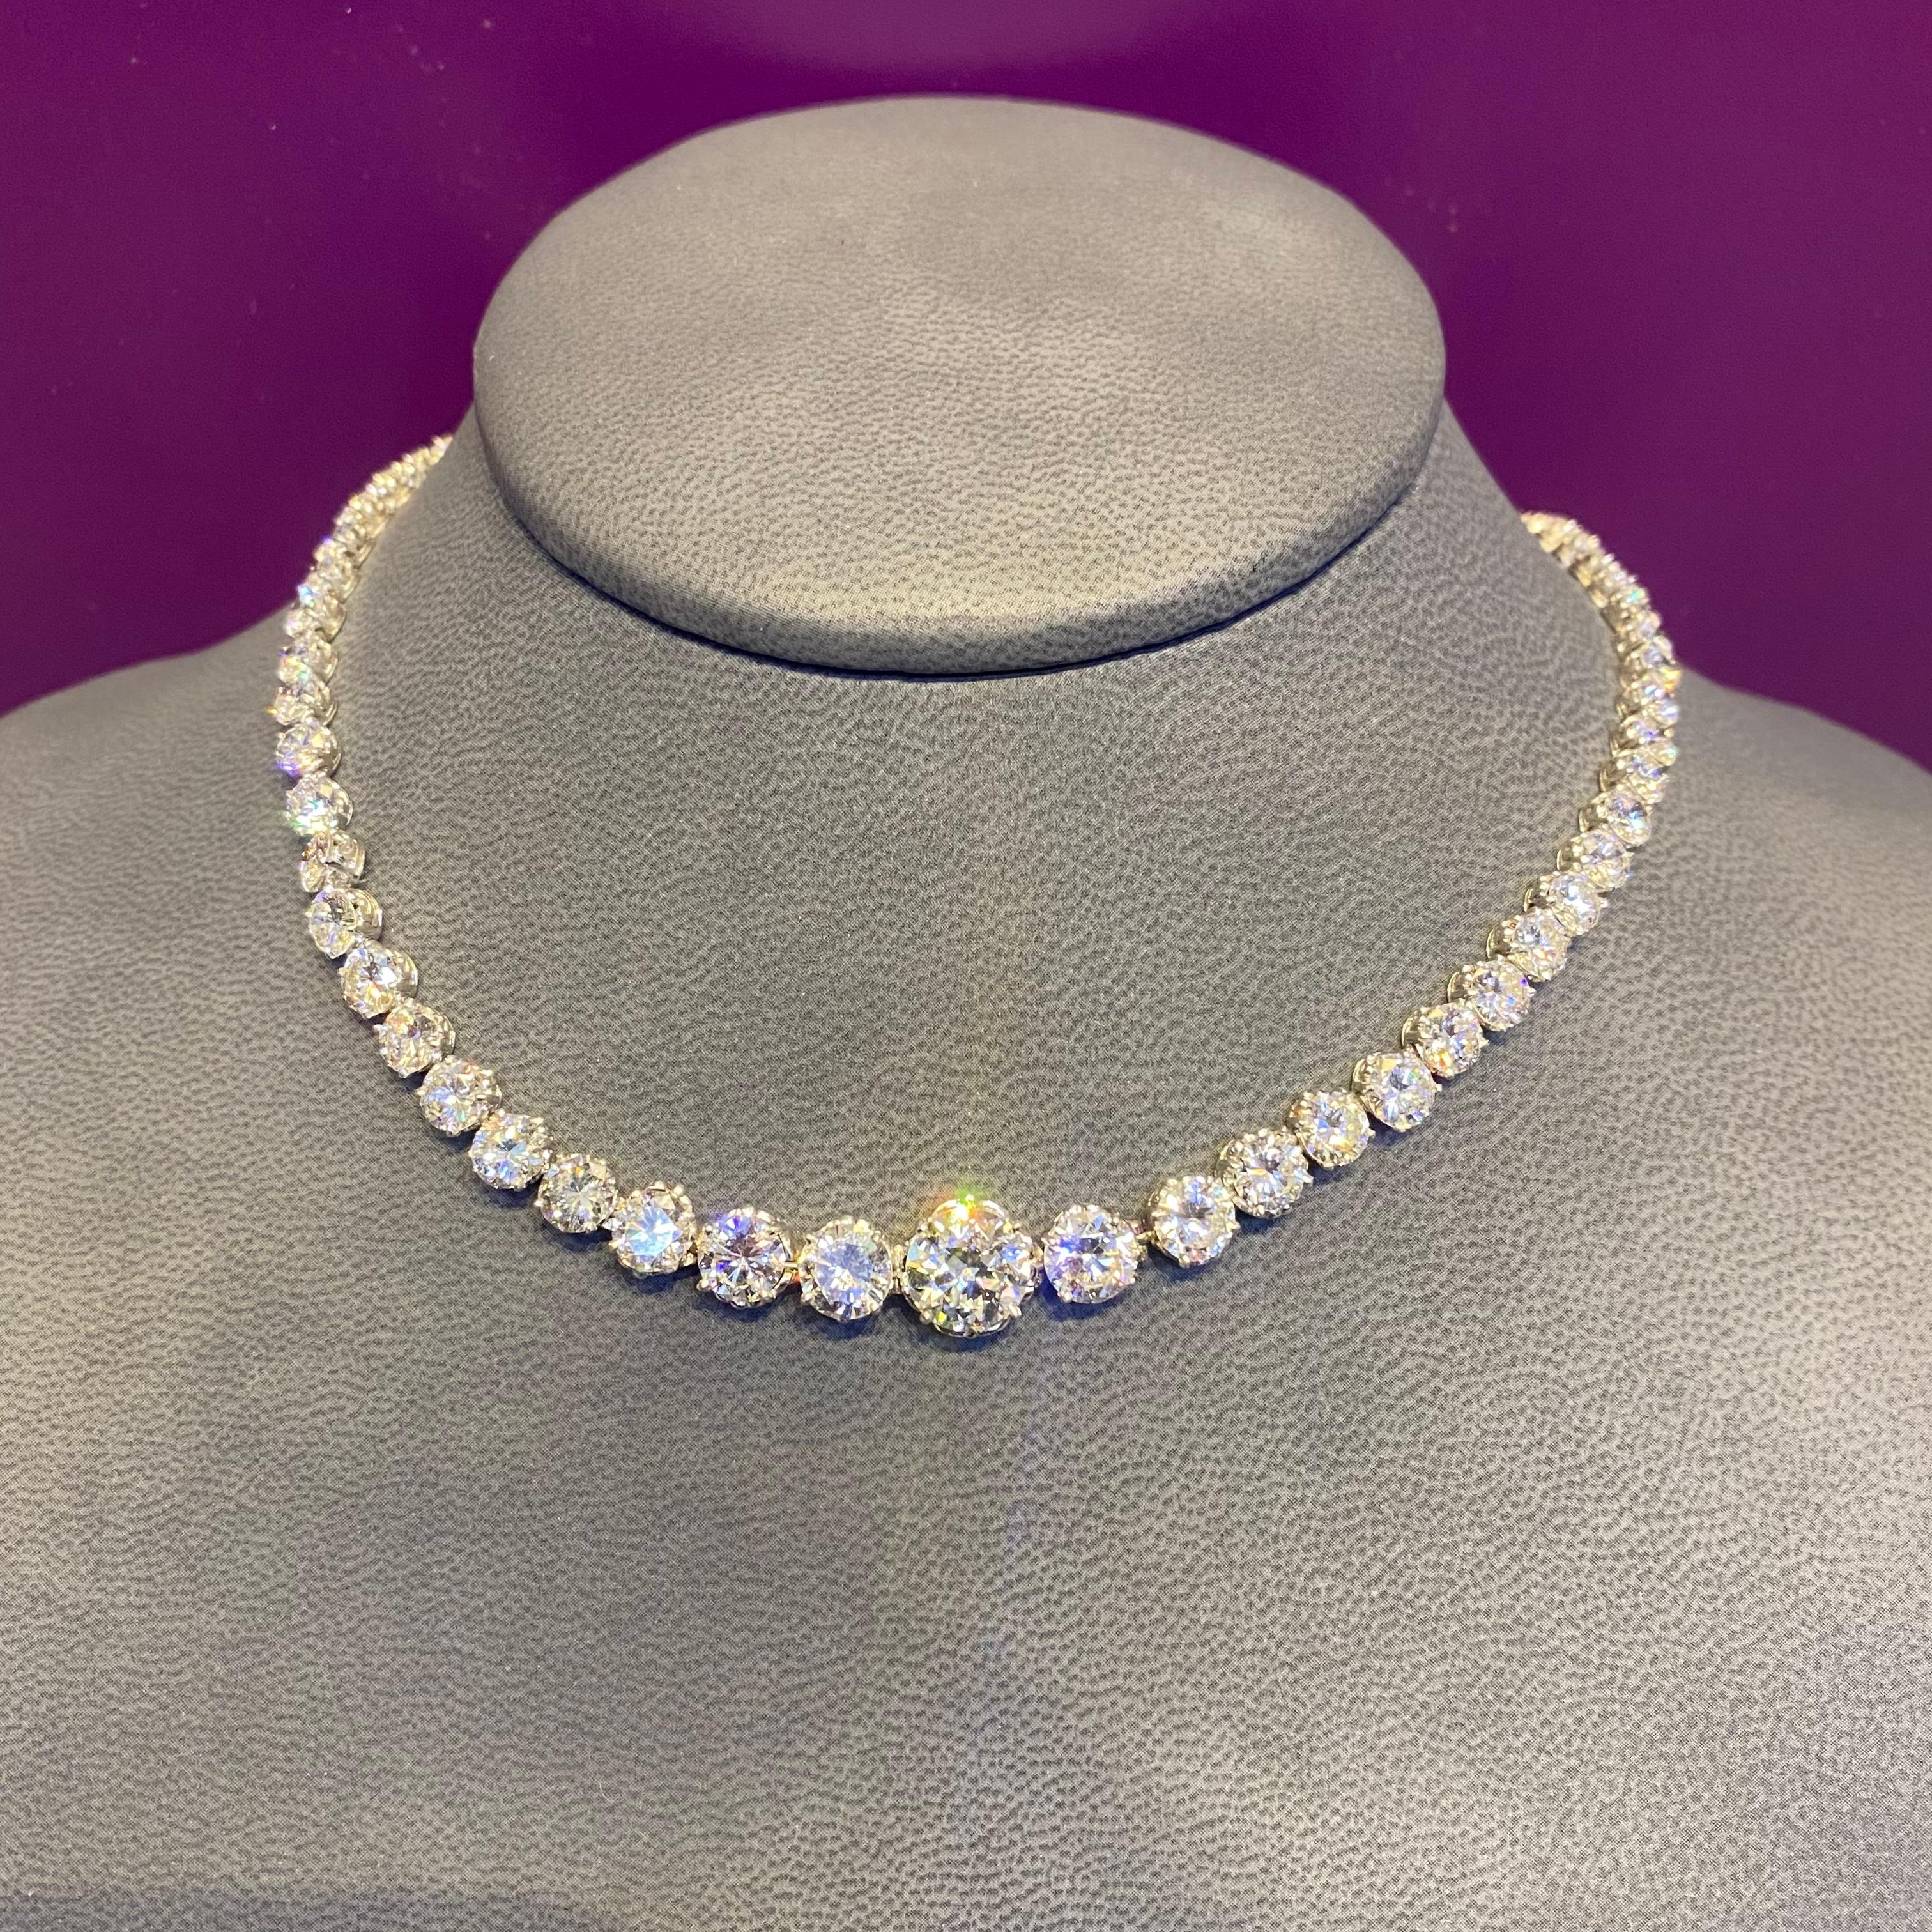 Diamond Rivière Necklace In Excellent Condition For Sale In New York, NY